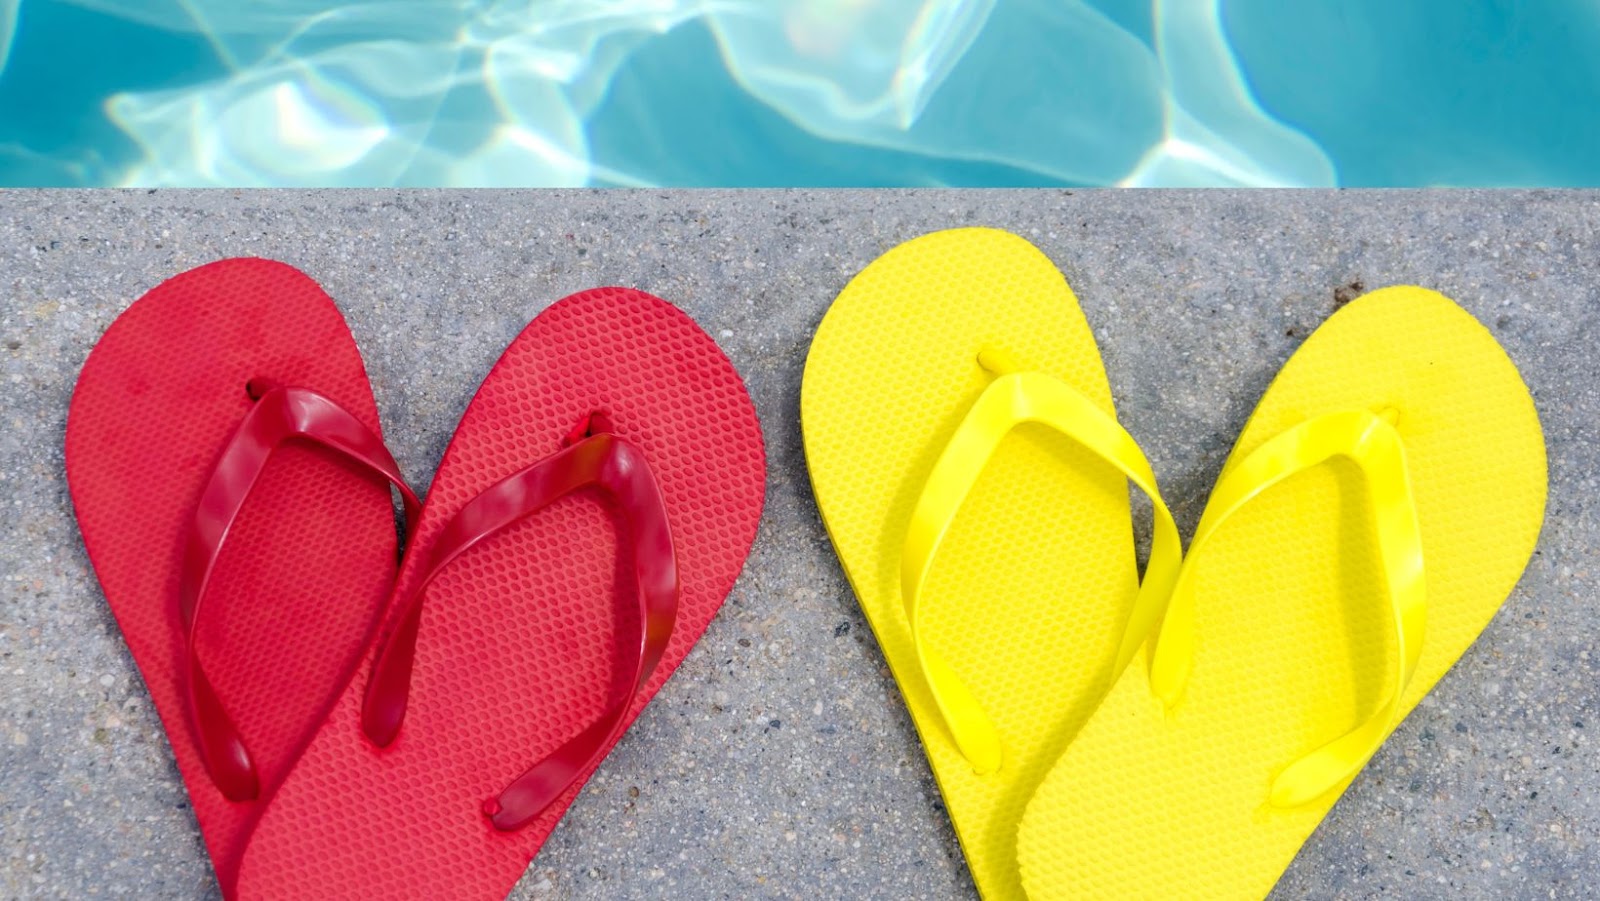 Rinse the Flip Flops with Warm Water